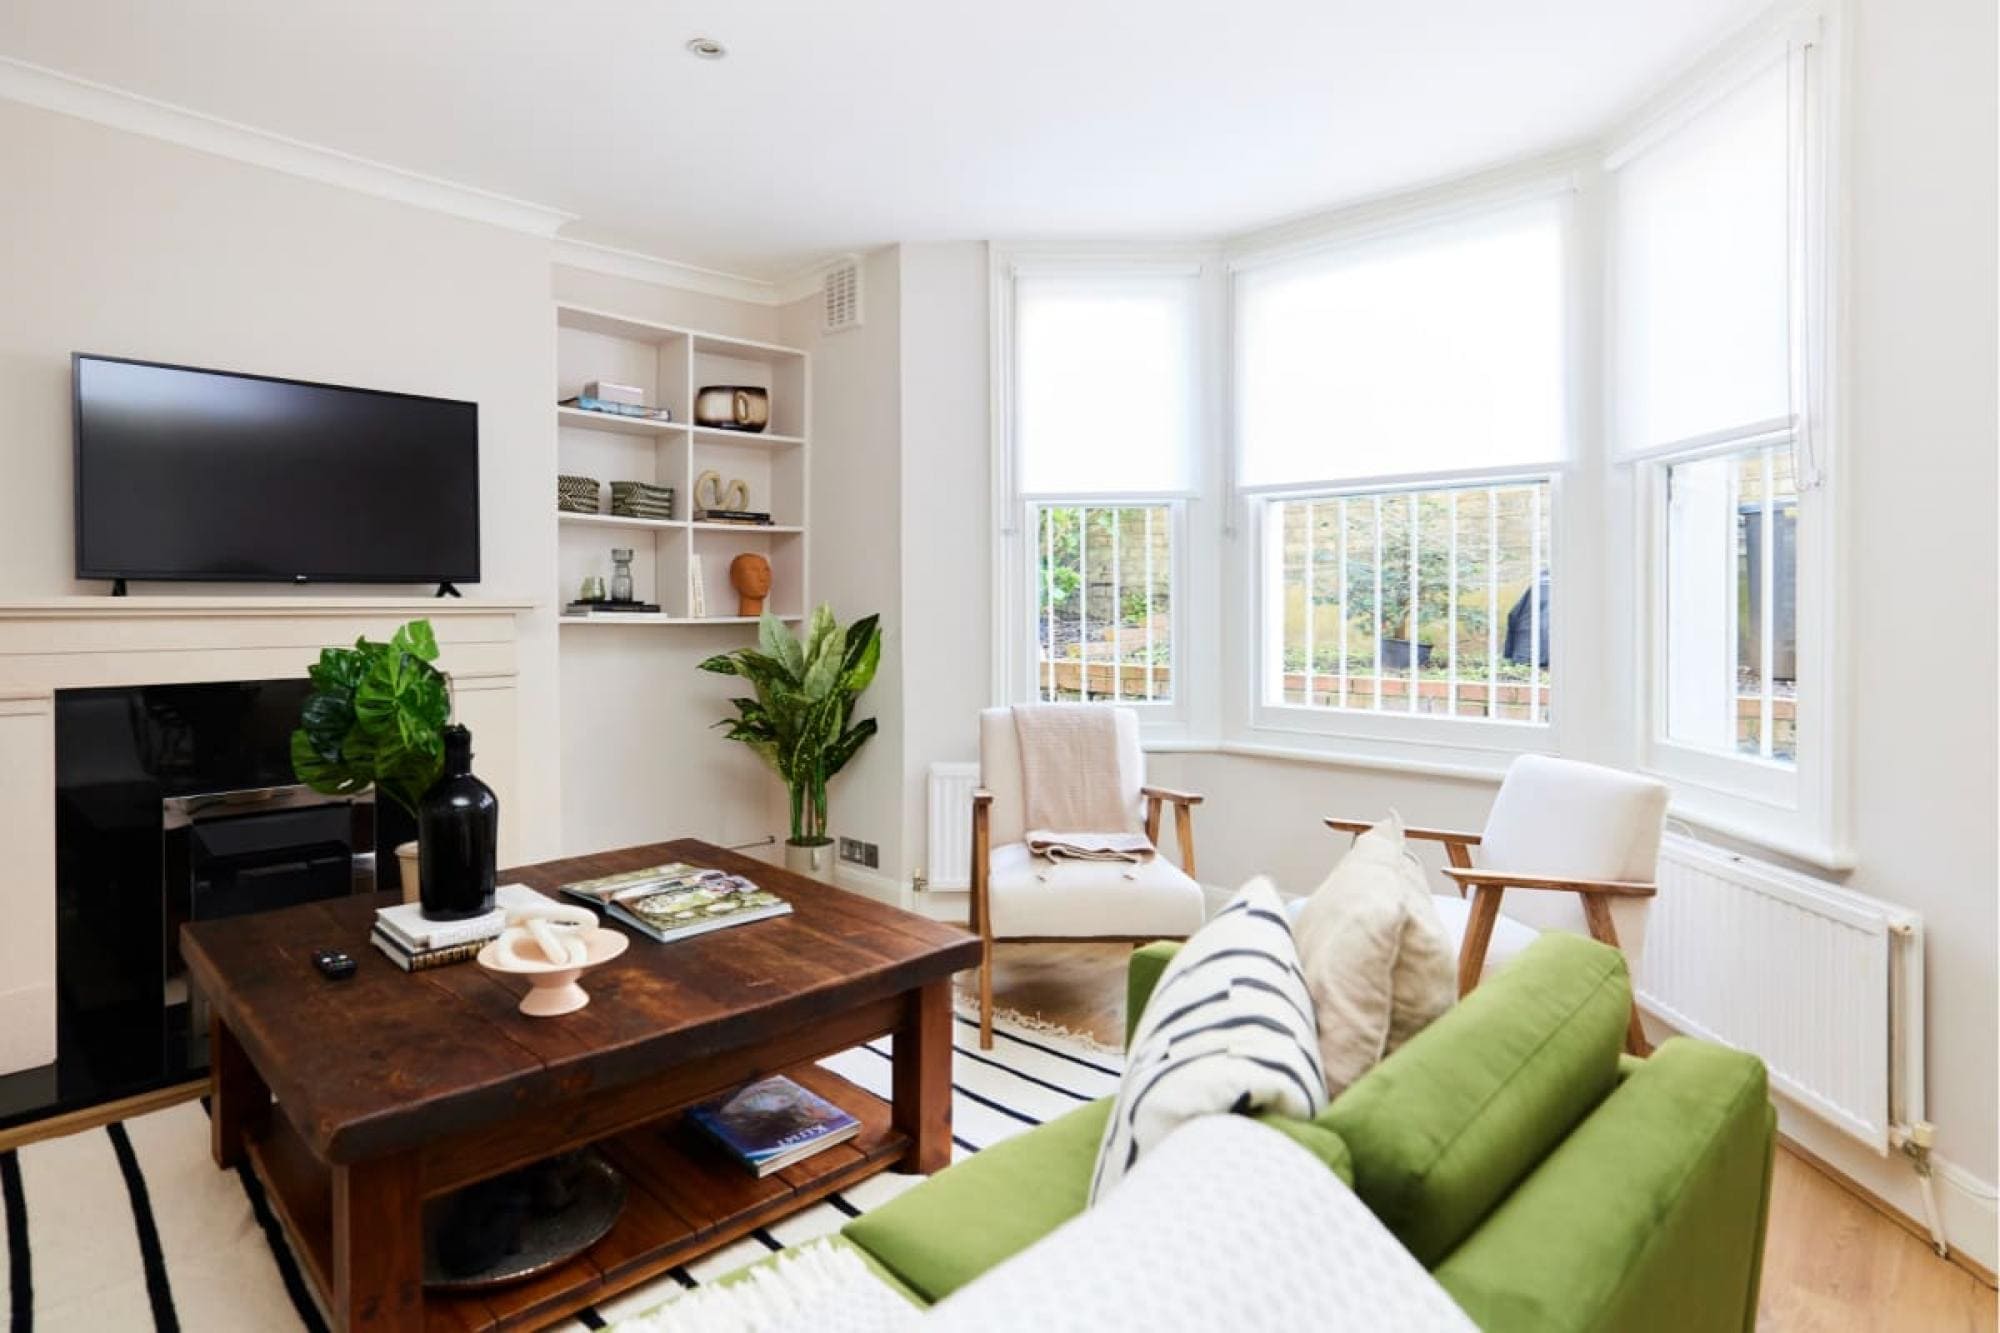 Property Image 2 - The London Classic - Captivating 2BDR Flat with Garden